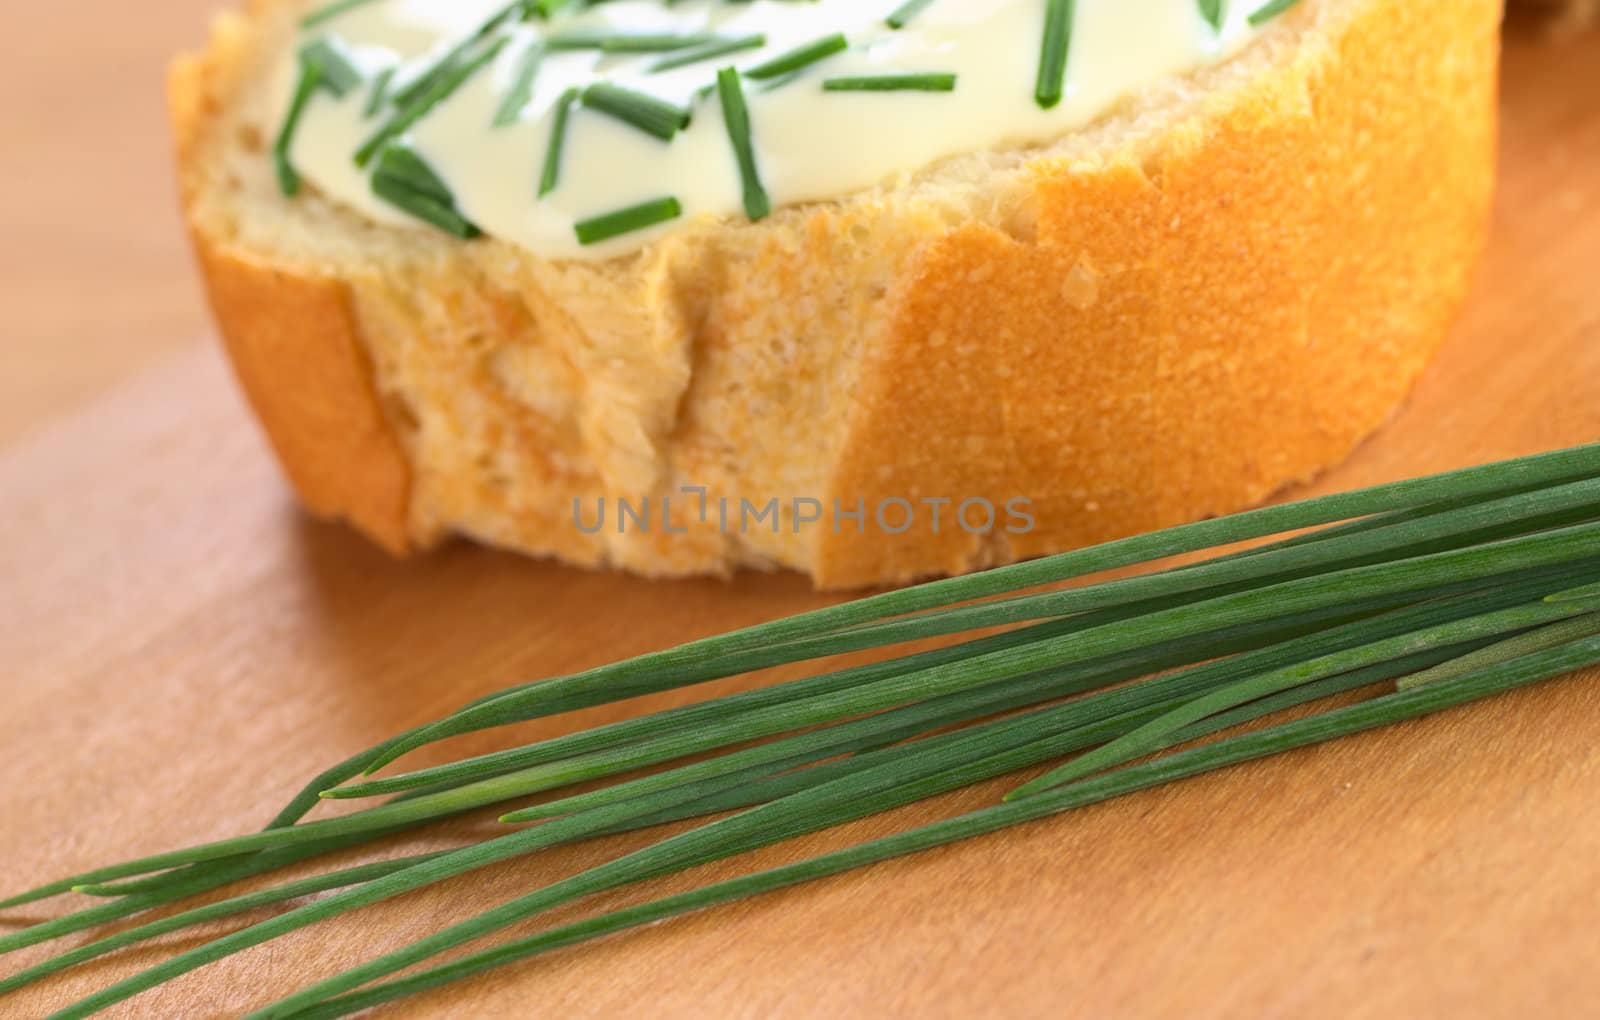 Fresh chives on cutting board with a baguette slice, soft cheese and chives in the back (Selective Focus, Focus one third into the chives)